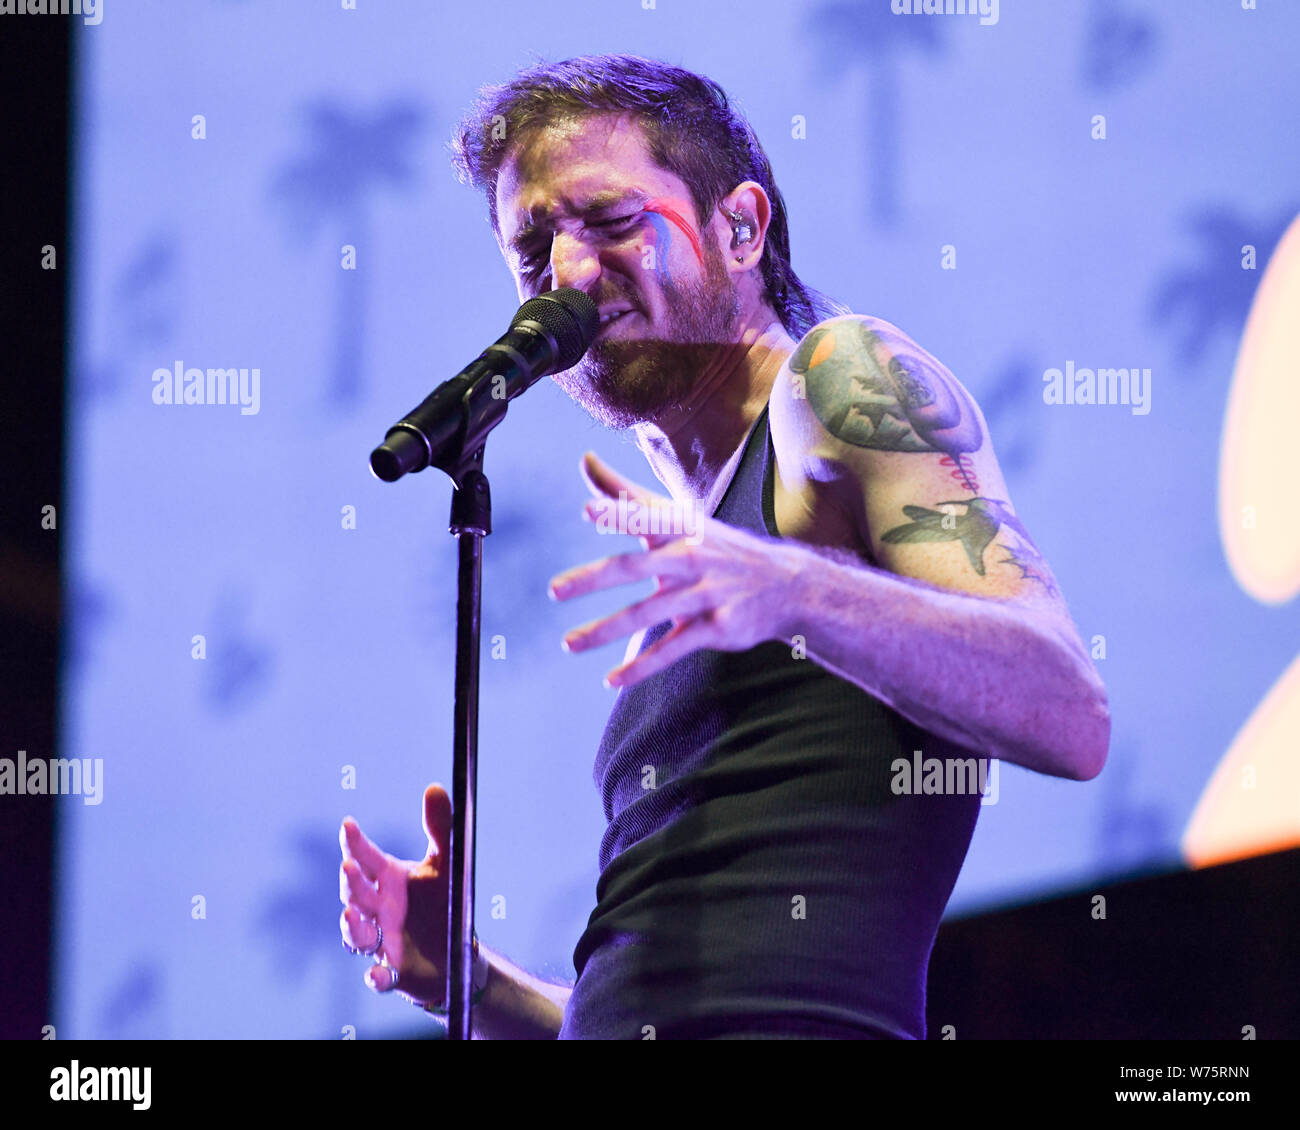 Nicholas Petricca of Walk The Moon performs at ALT 98.7 Summer Camp at the Queen Mary in Long Beach on August 3, 2019. performs at ALT 98.7 Summer Camp at the Queen Mary in Long Beach on August 3, 2019. Stock Photo